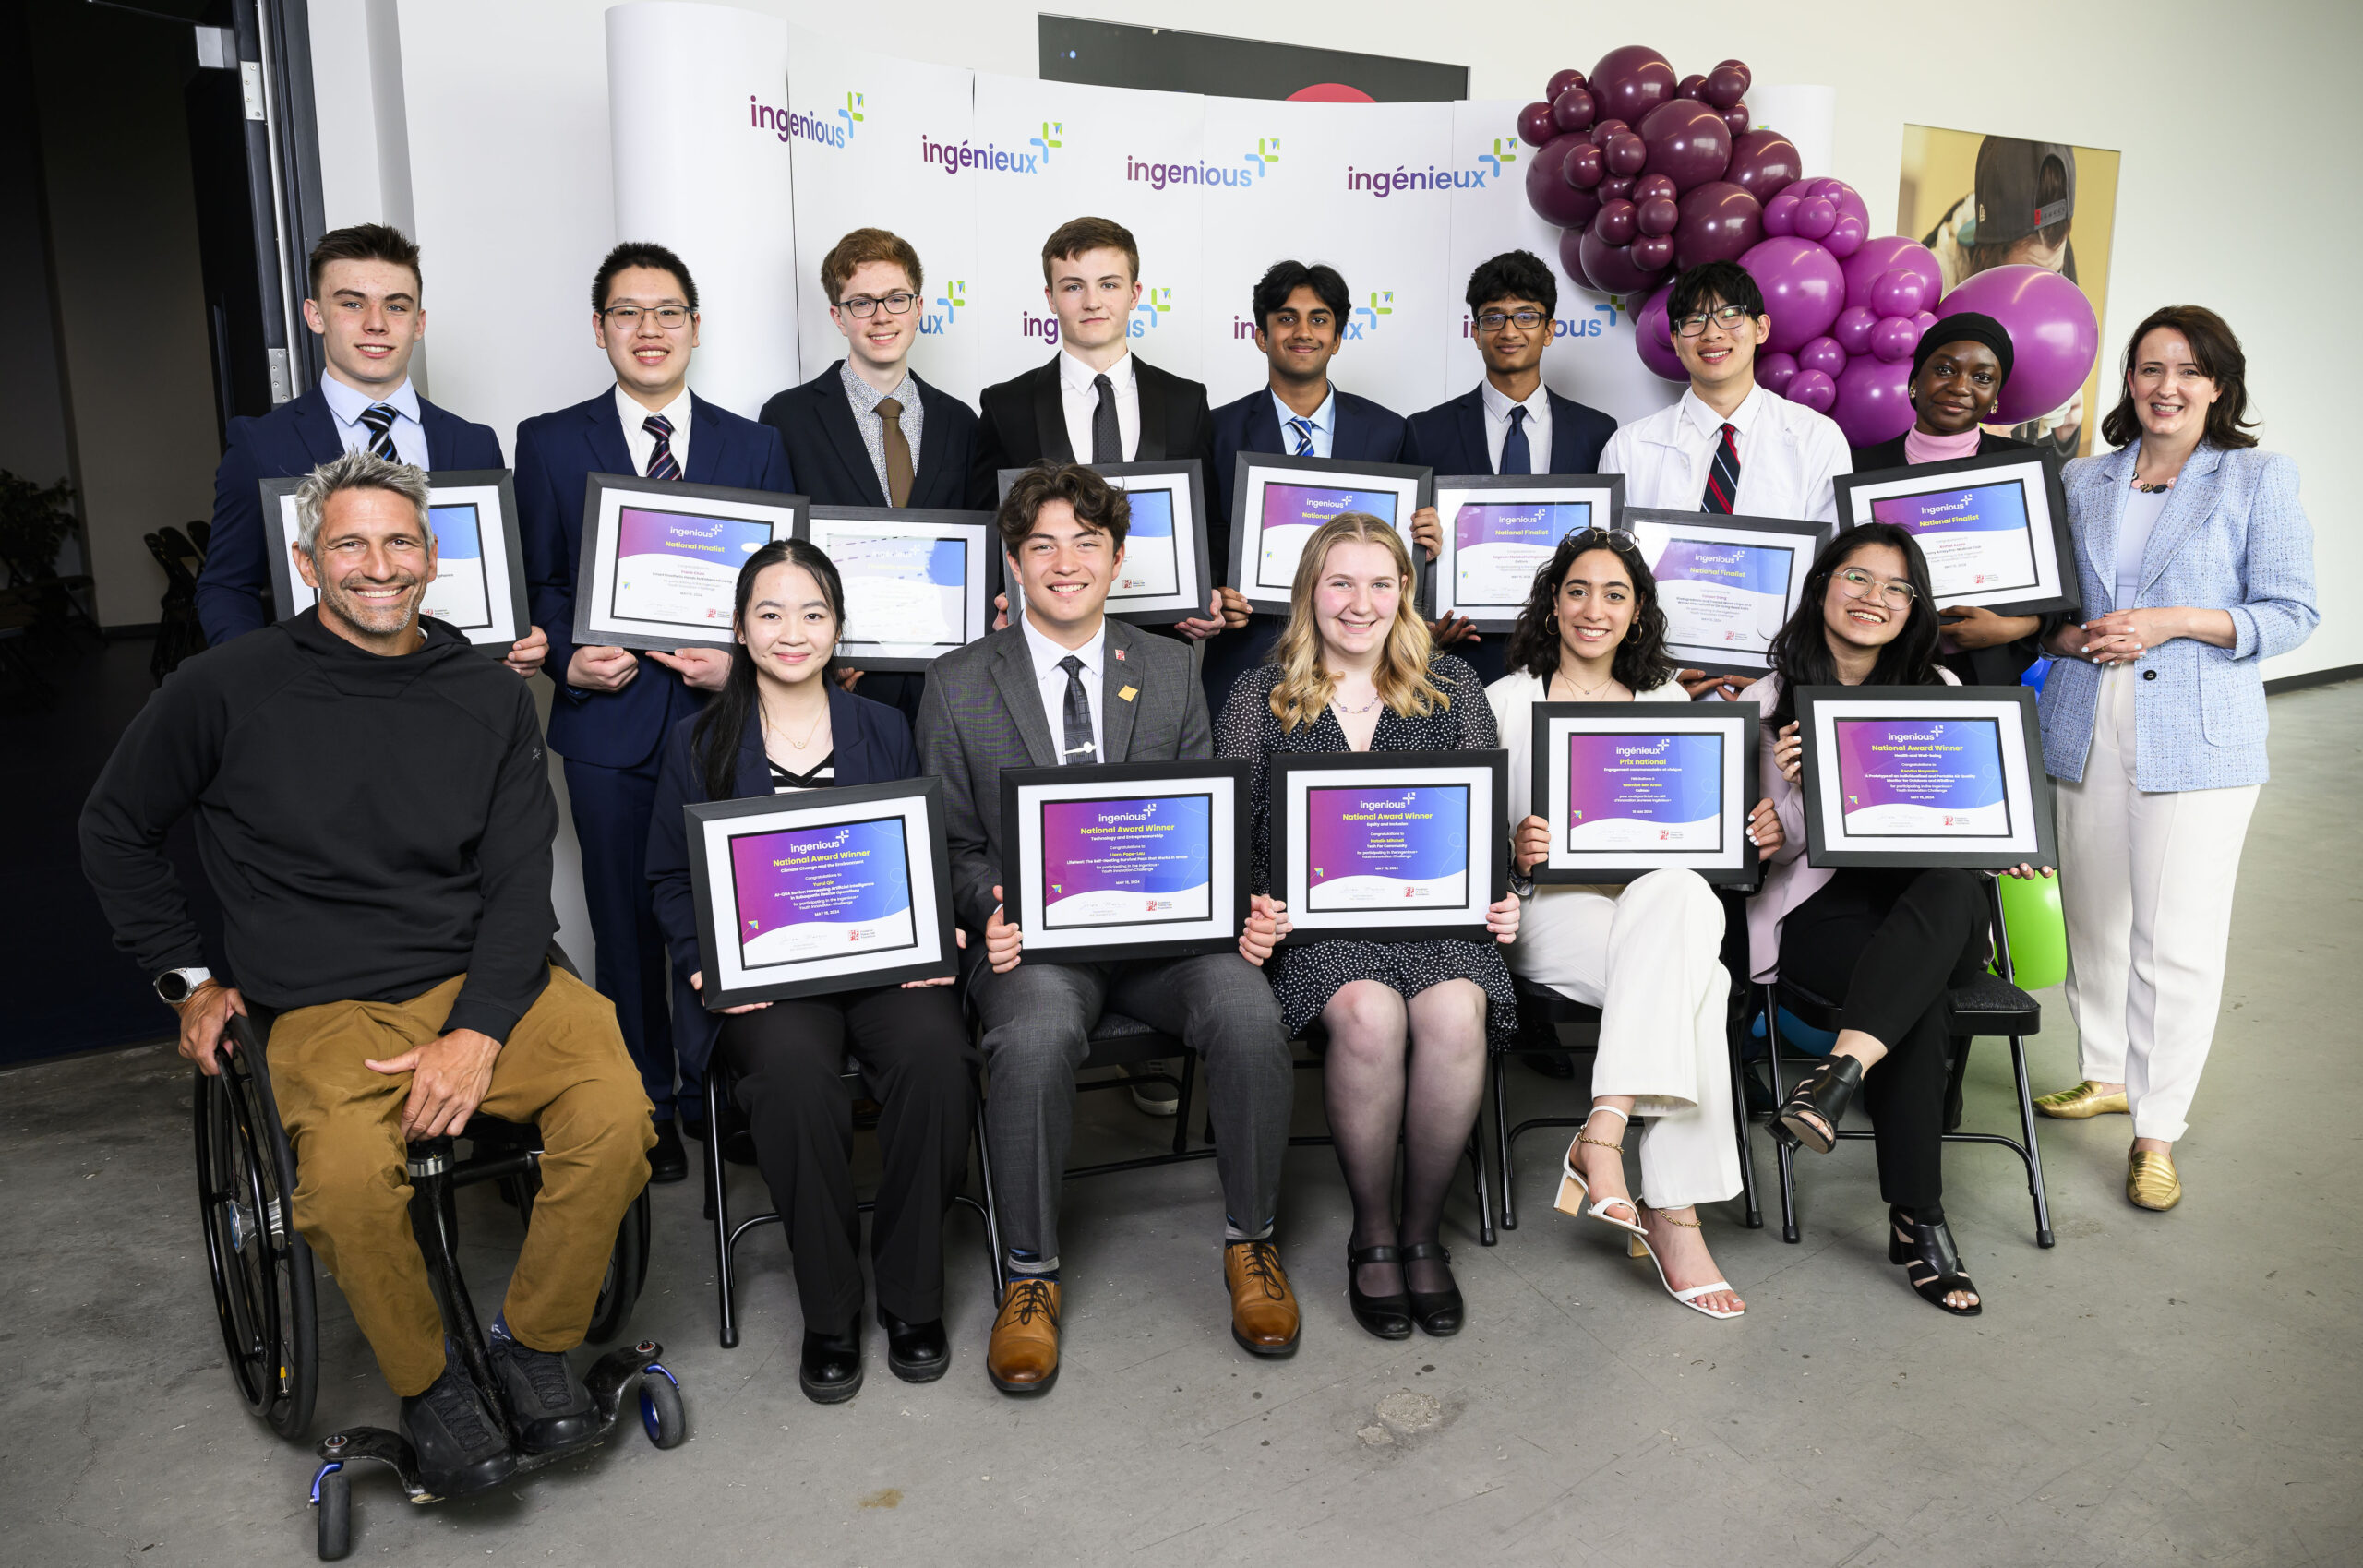 Ingenious+ National Winners and Finalists posing with their certificates alongside Christian Bagg and Teresa Marques